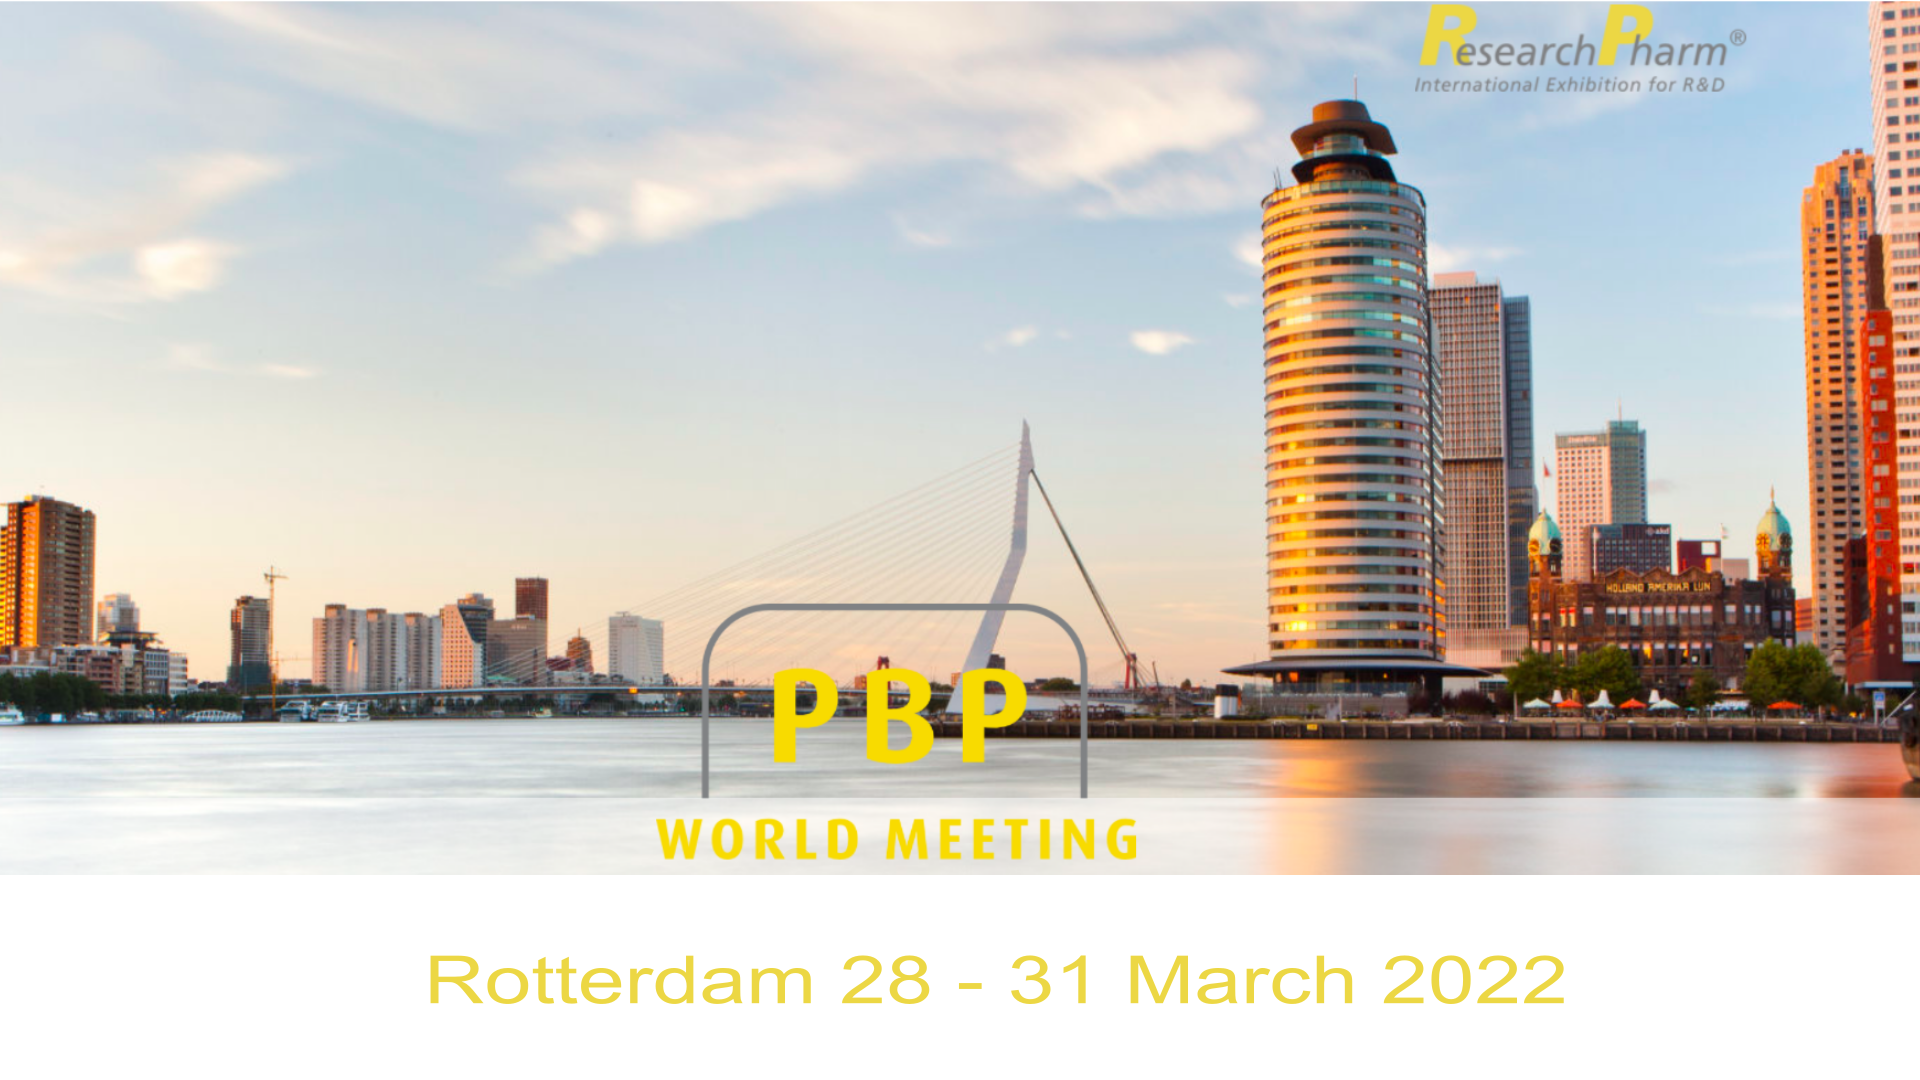 Meet us at 13th World Meeting in Rotterdam